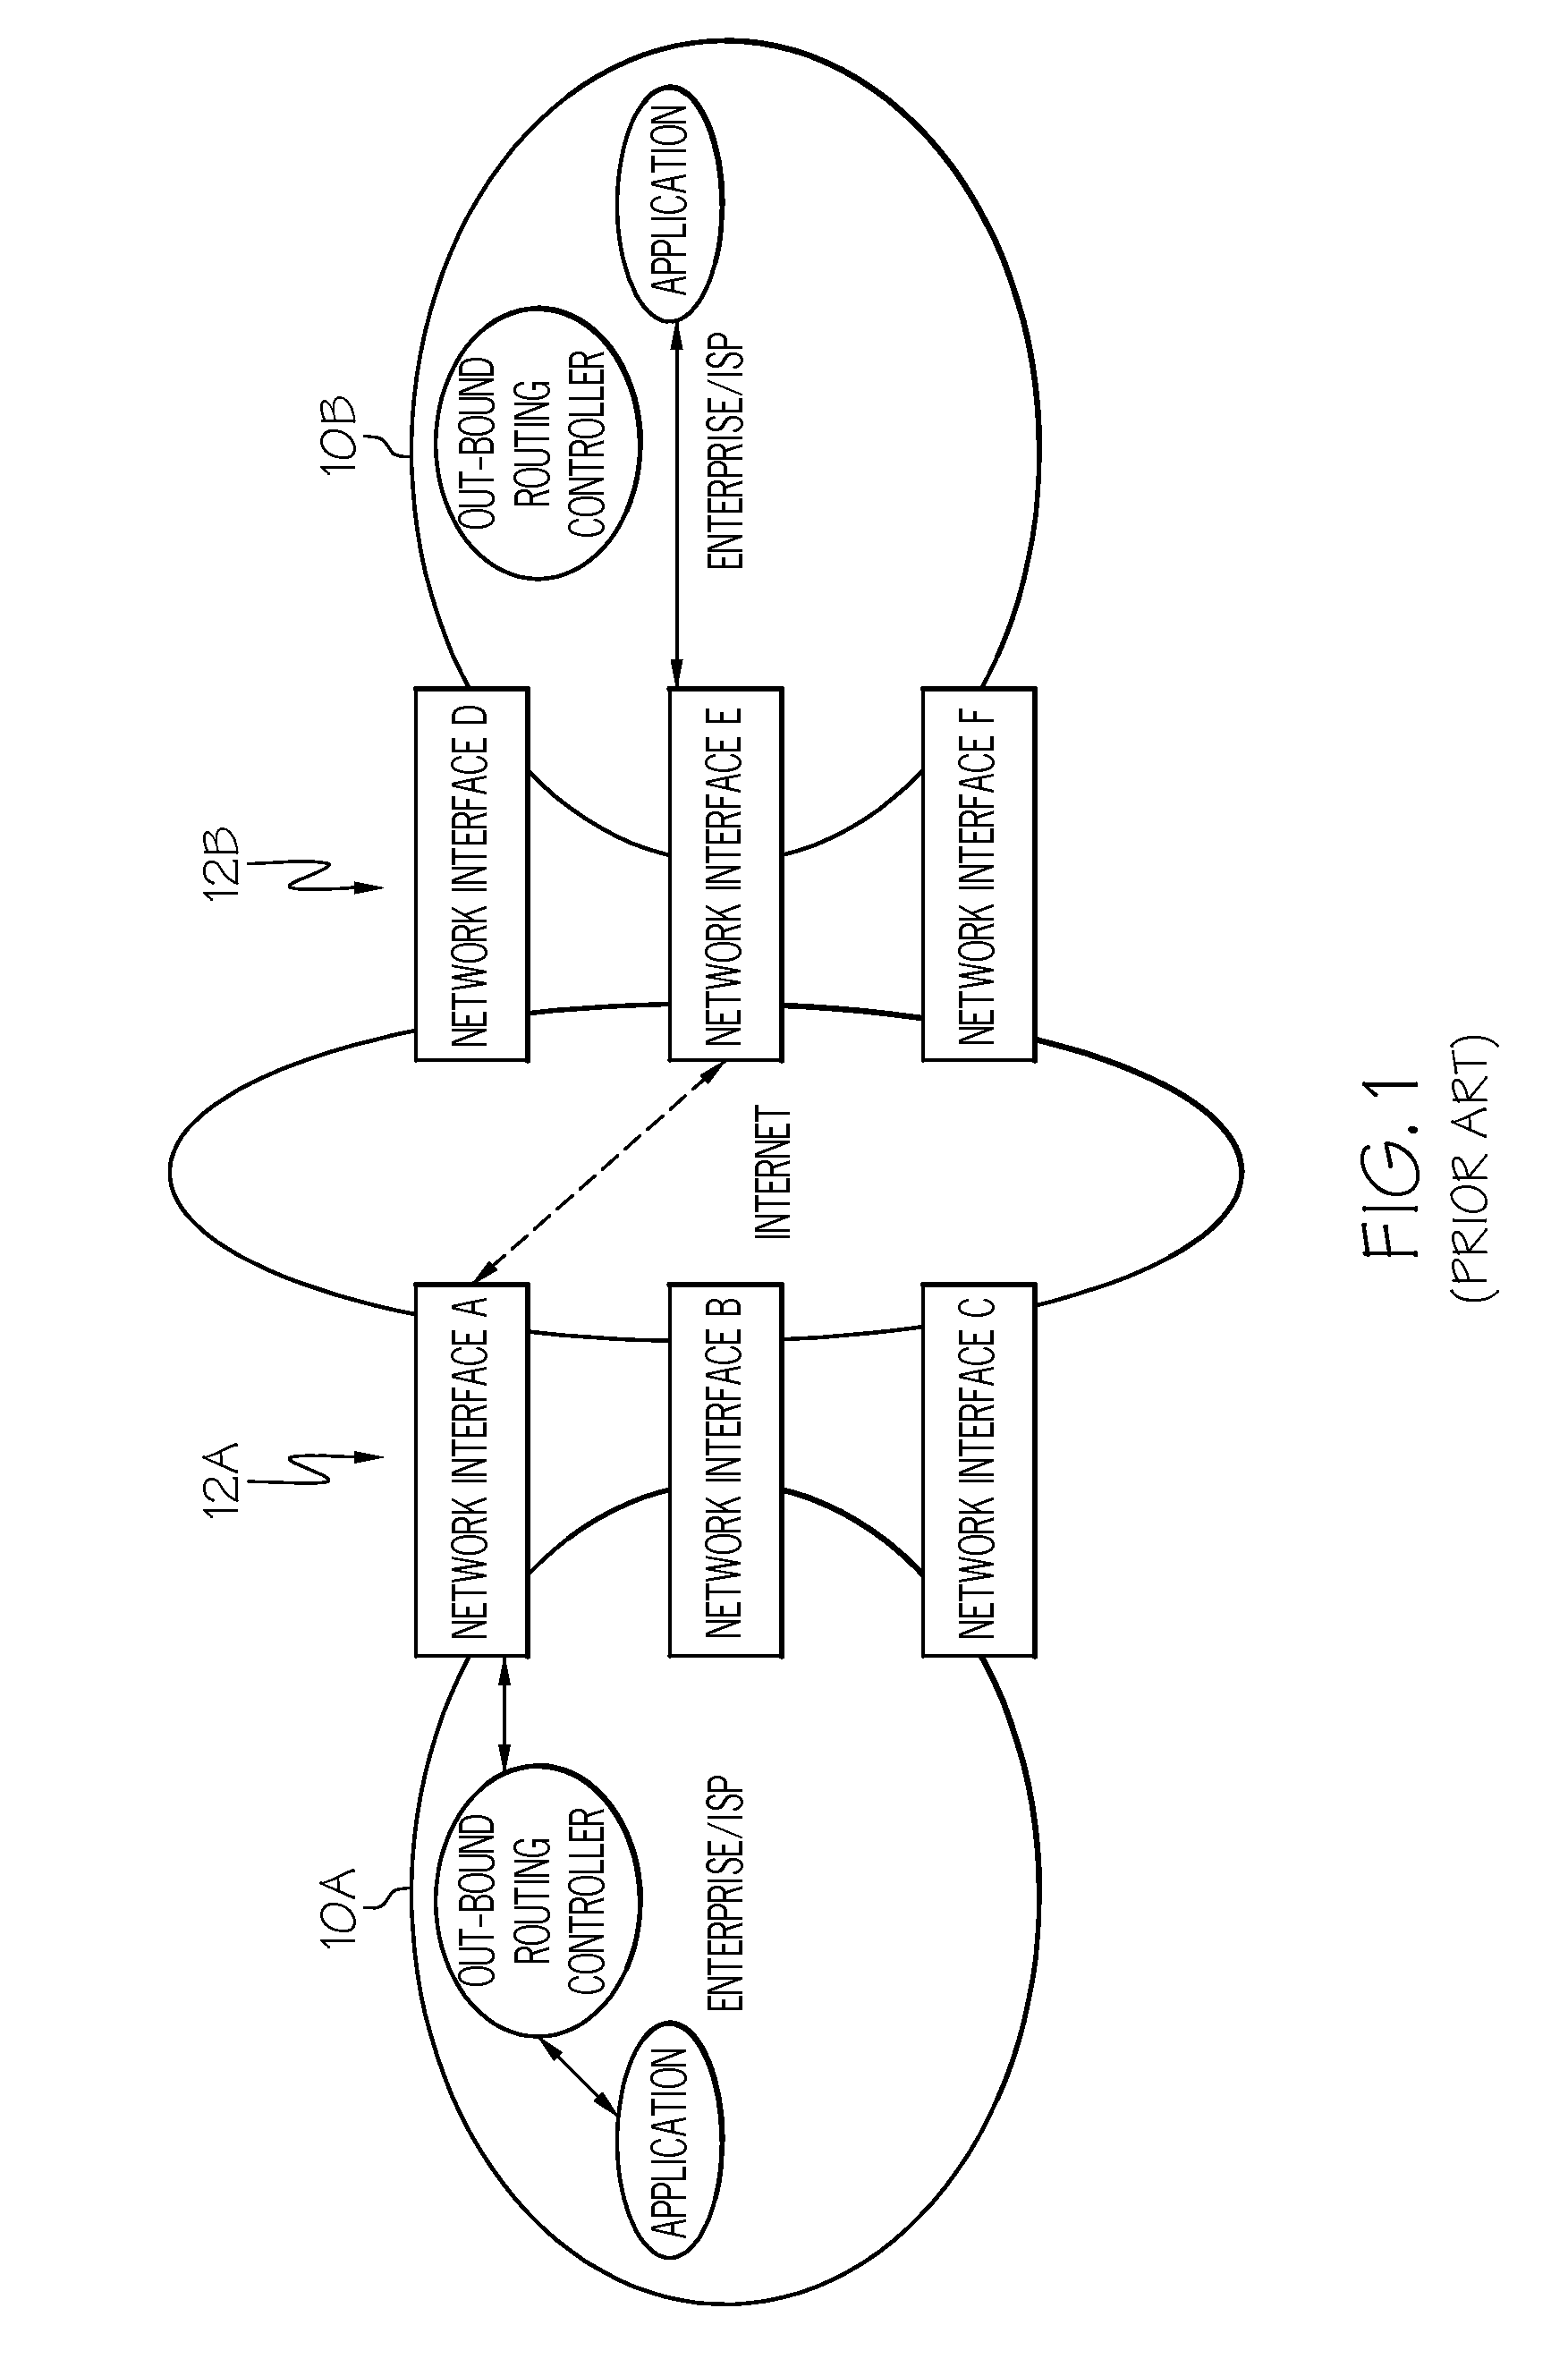 Method, system, and program product for enhancing network communications between endpoints